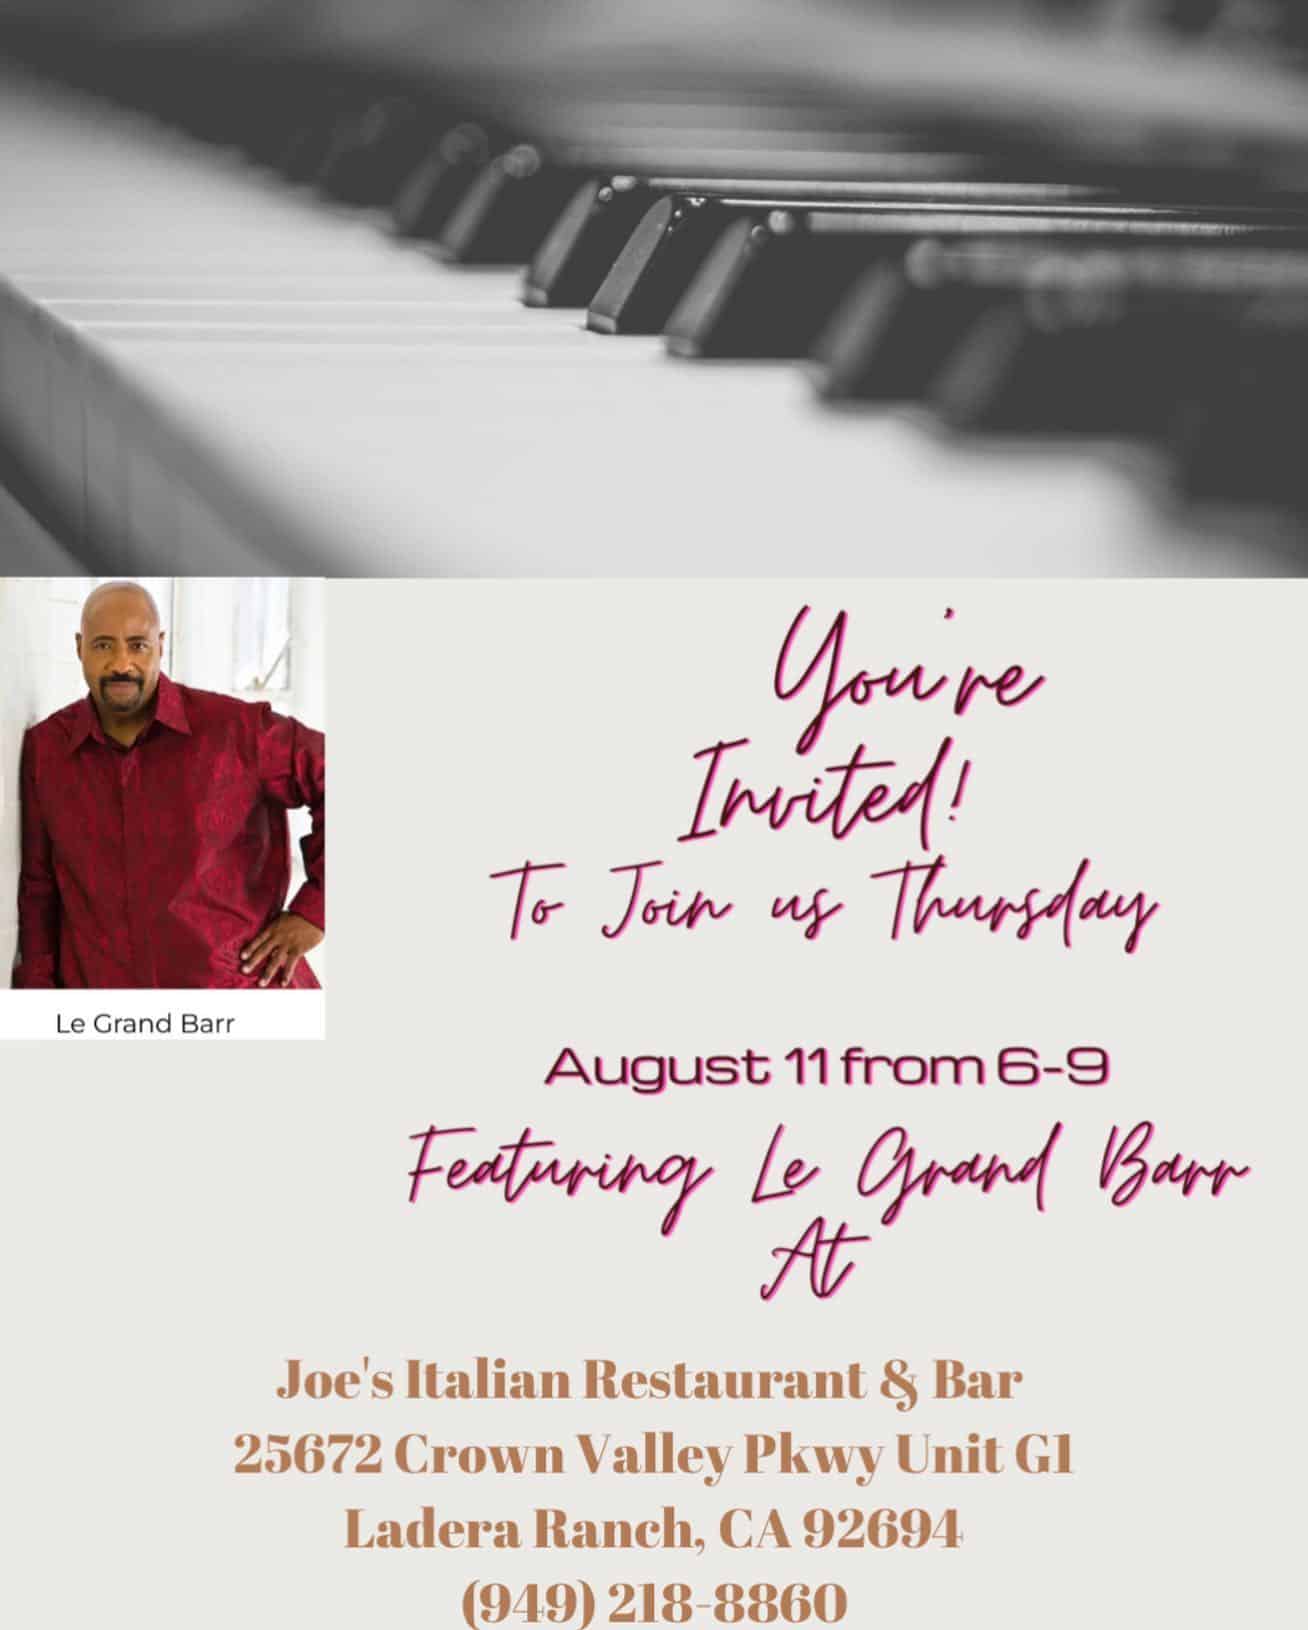 Thursday Night 8/11/22 on the patio Le Grand Barr from 6 PM to 9 PM - at Joe's Italian Restaurant & Bar.